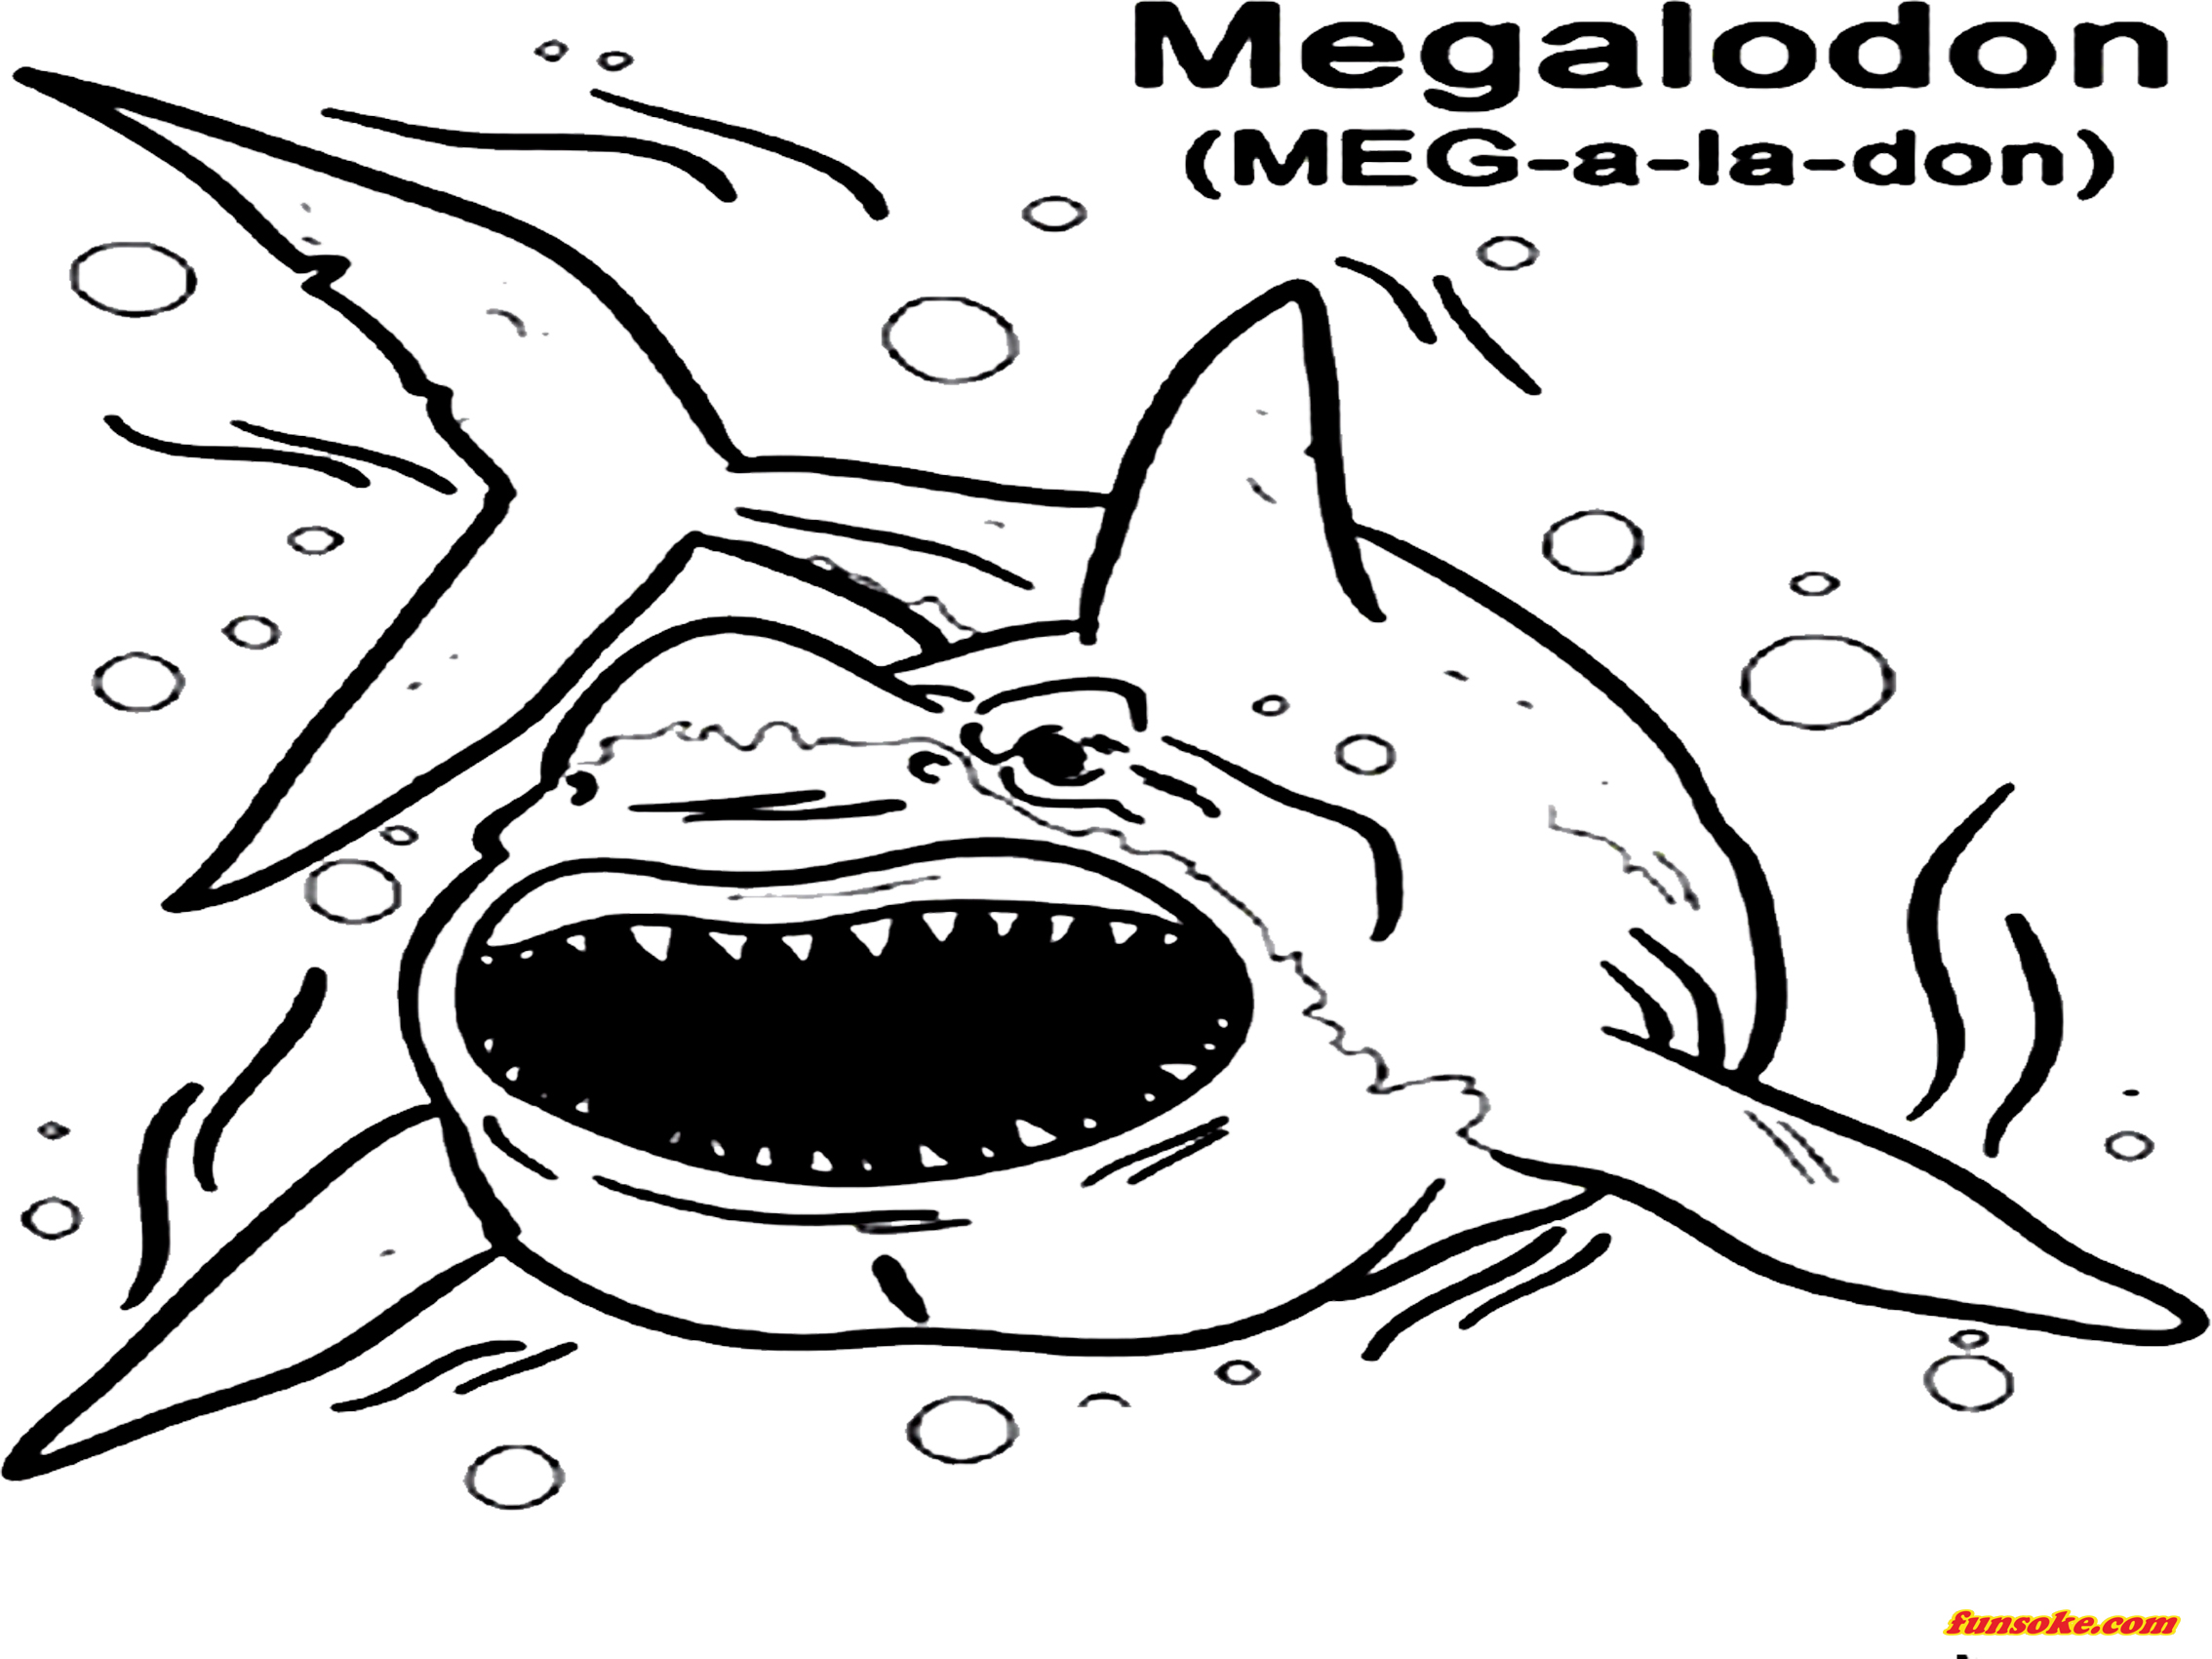 Megalodon coloring pages to print - Funsoke